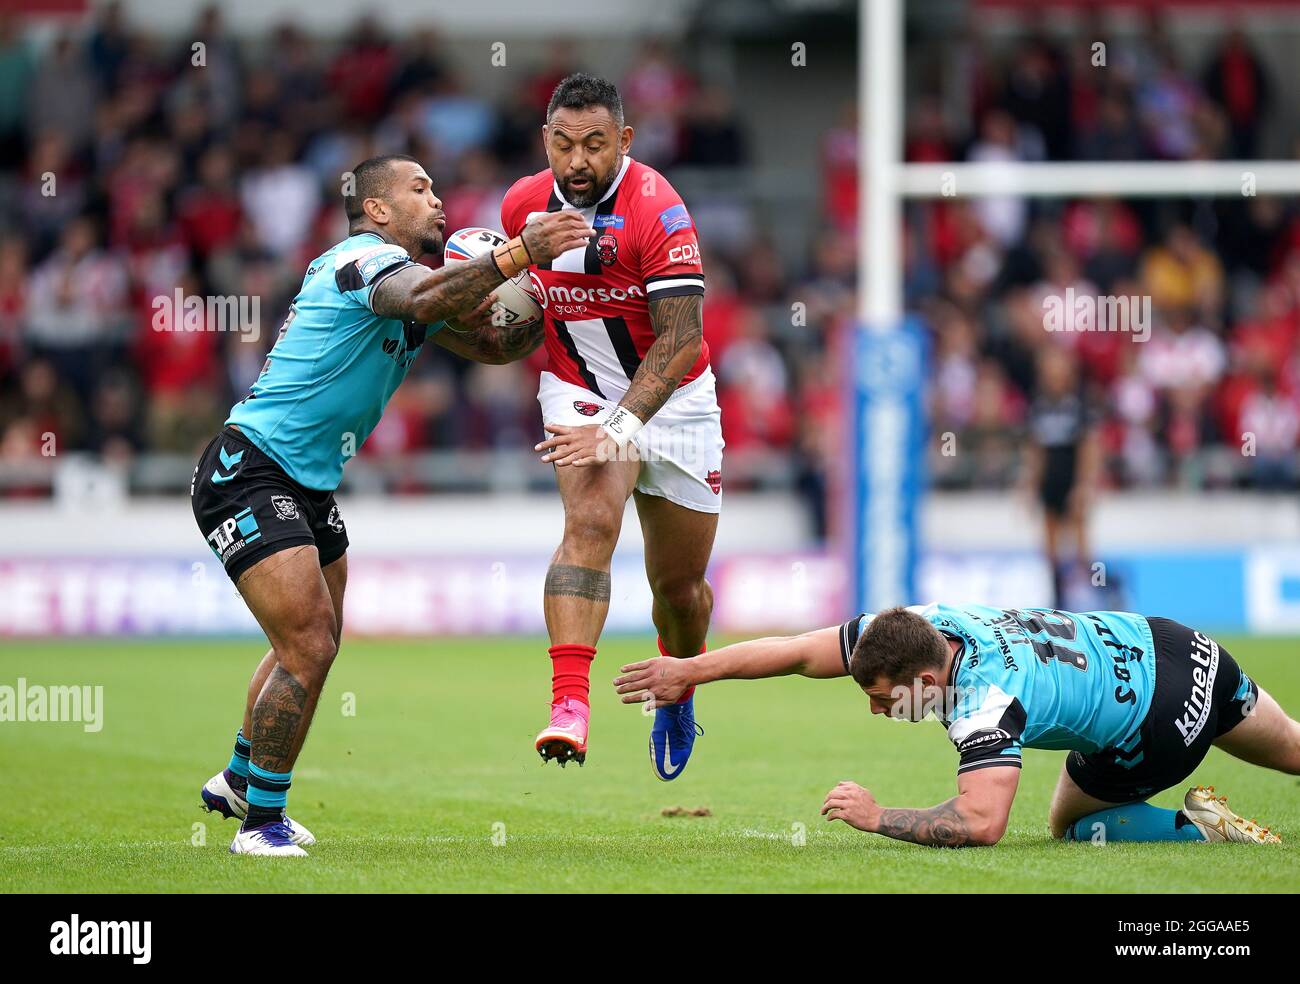 Salford Red Devils' Krisnan Inu (centre) is tackled by Hull FC's Manu Ma’u (left) and Hull FC's Jordan Lane during the Betfred Super League match at the AJ Bell Stadium, Salford. Picture date: Monday August 30, 2021. Stock Photo